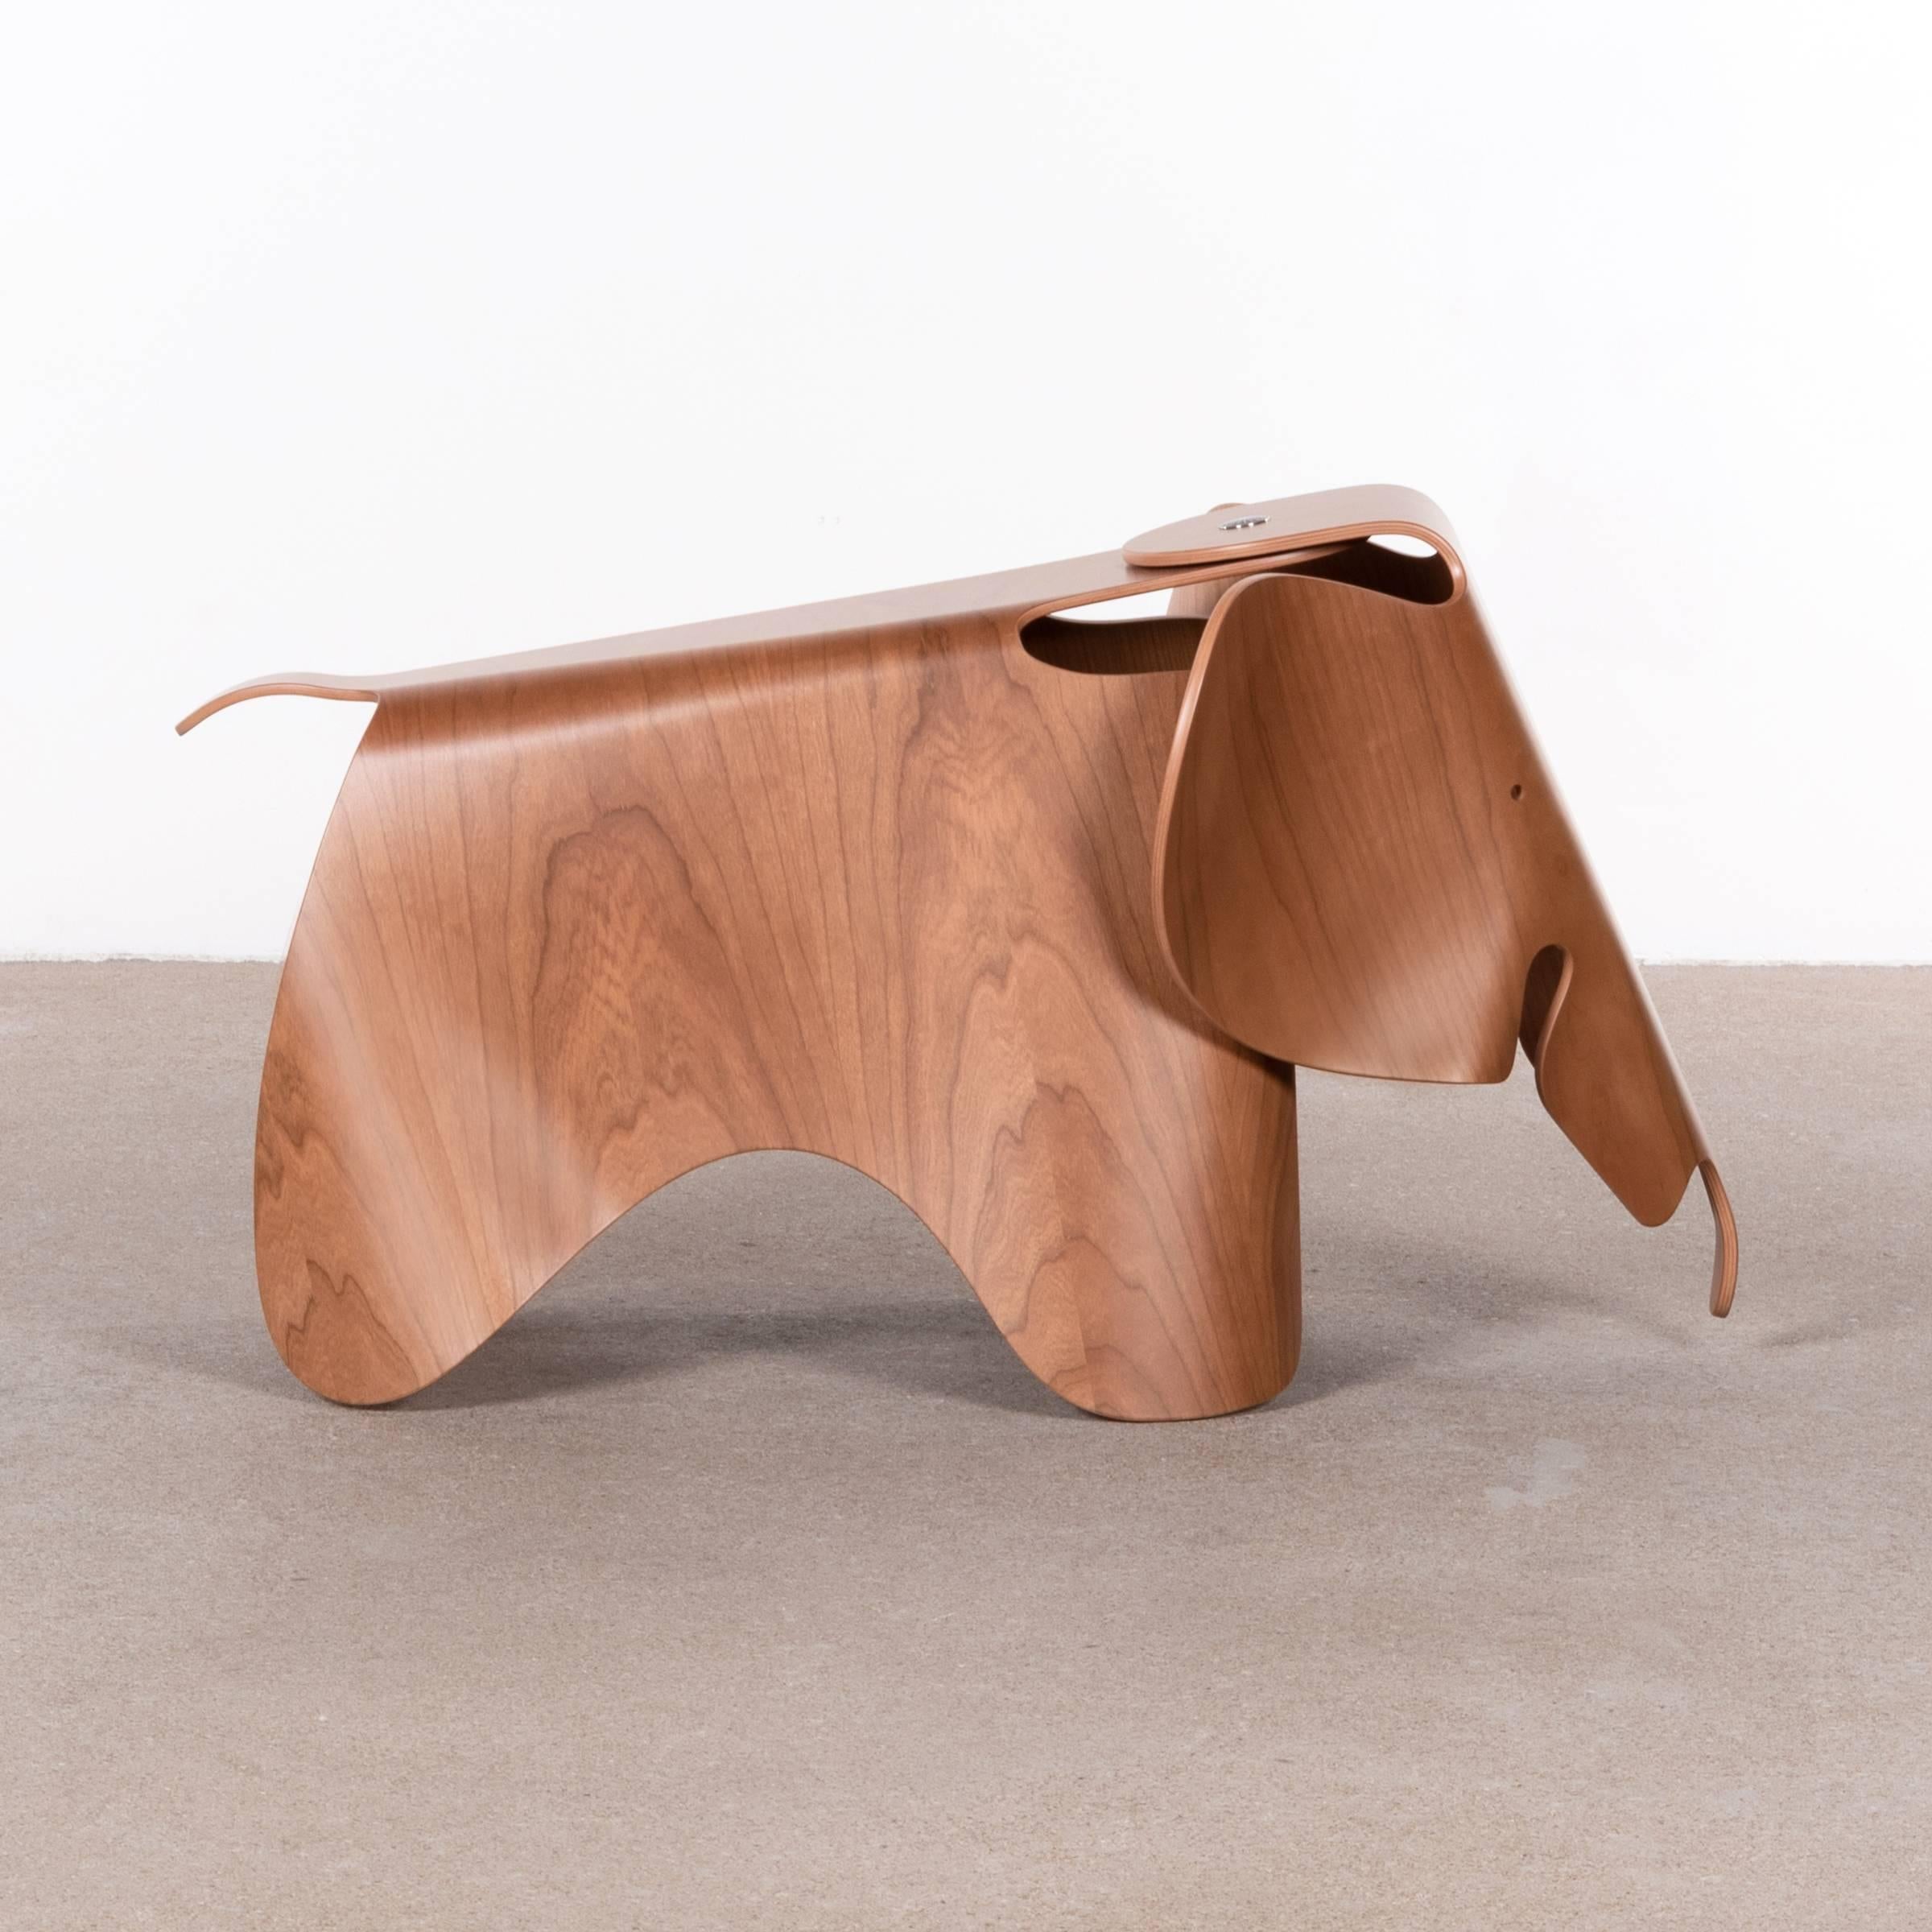 Charles & Ray Eames developed a toy elephant made of plywood in 1945, but the piece never went into production. After a limited edition in 2007, Vitra has now launched serial production of the Eames elephant in plywood for the very first time.